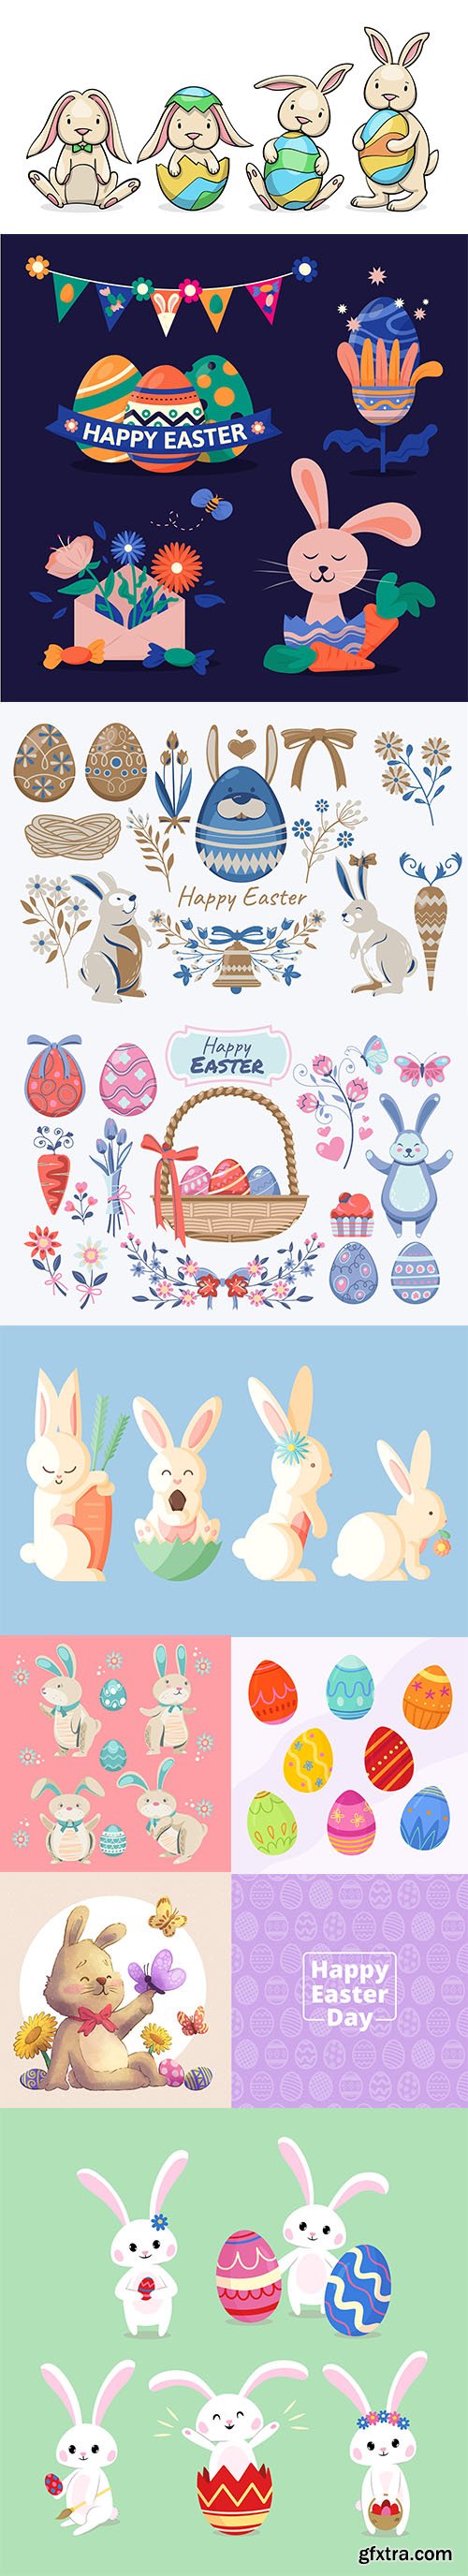 Easter bunny and other easter elements vector collection